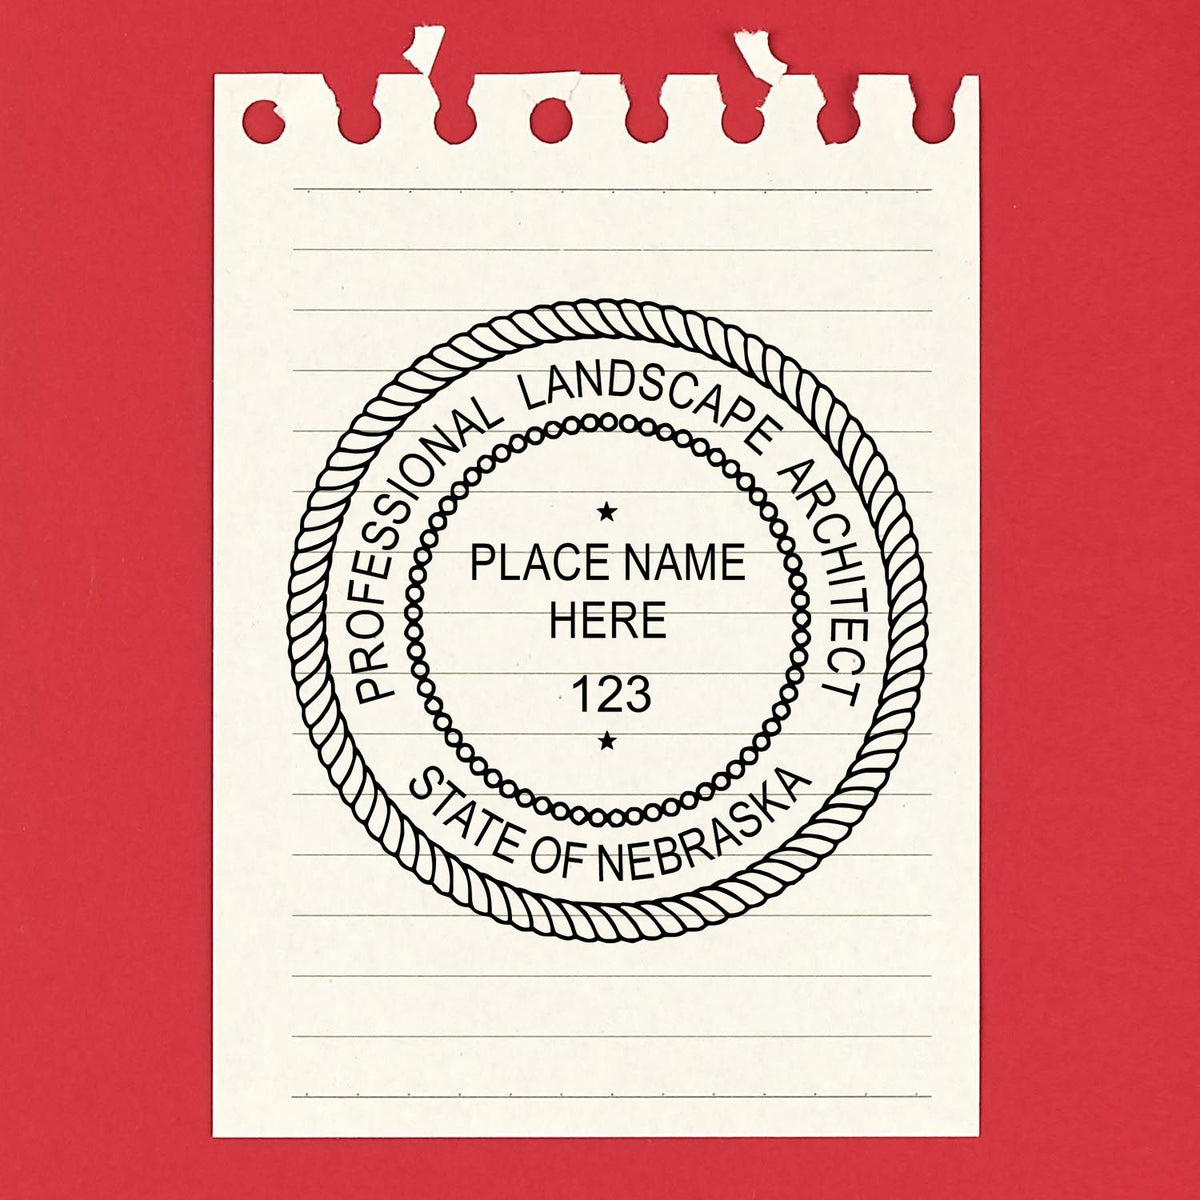 A stamped impression of the Digital Nebraska Landscape Architect Stamp in this stylish lifestyle photo, setting the tone for a unique and personalized product.